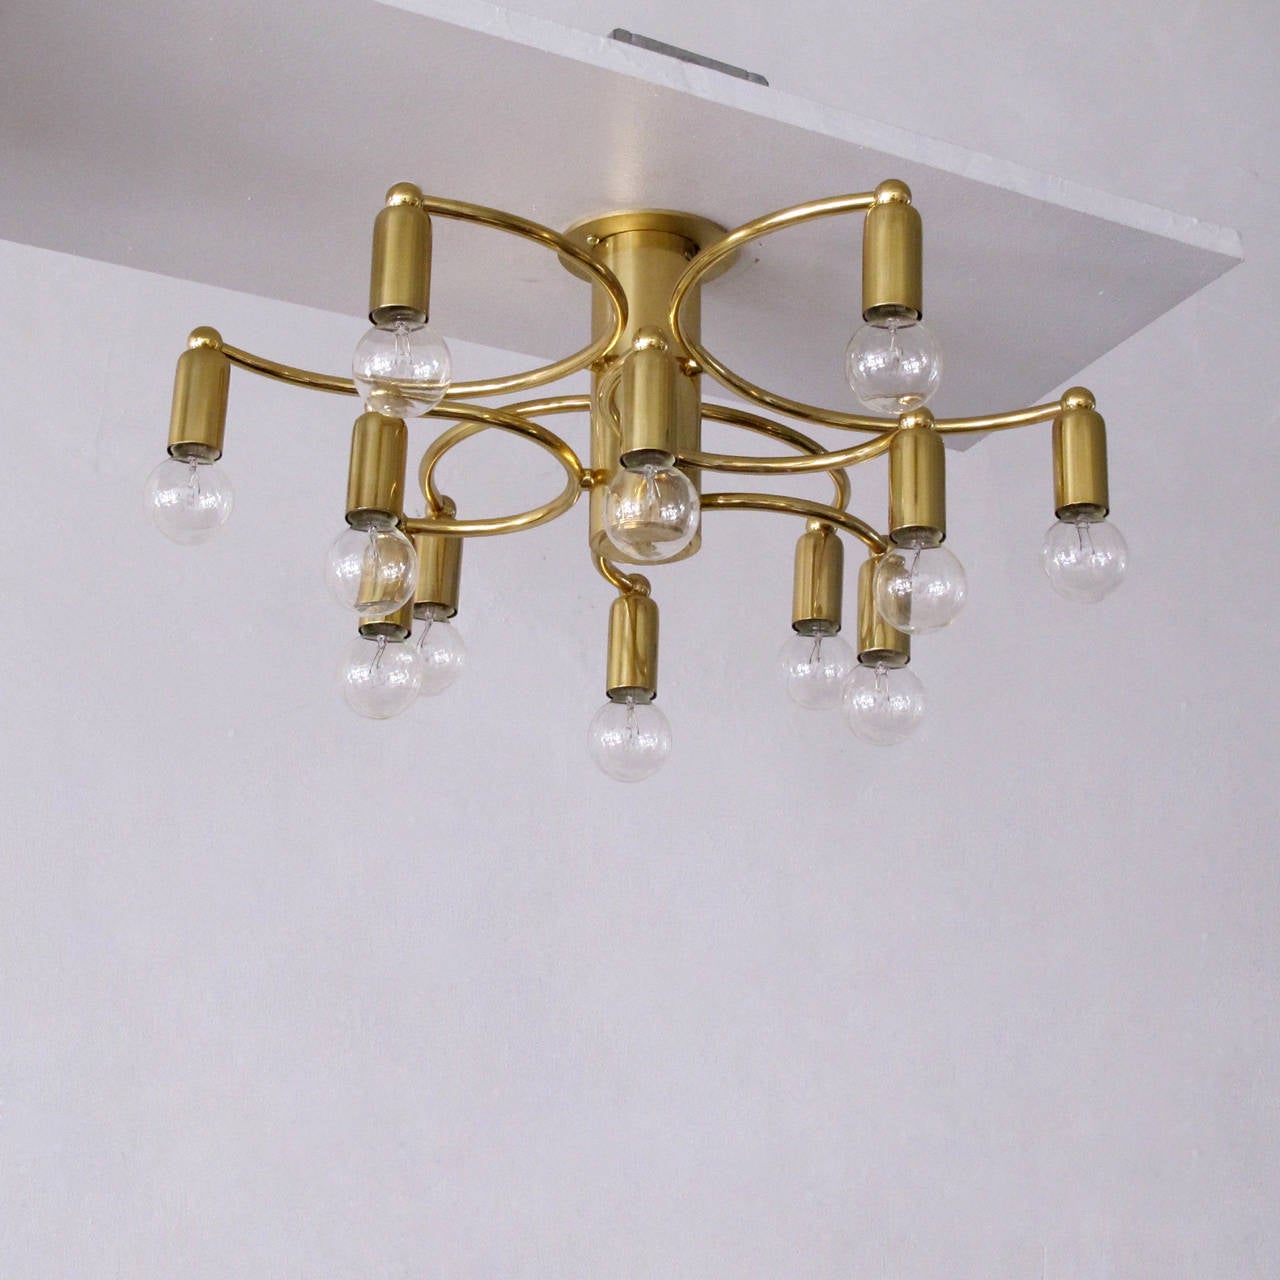 Wonderful brass twelve-light flush mount ceiling light by Gaetano Sciolari with two tiers of three semi-circular arms, each equipped with two sockets on either end, can be used as wall sconce as well.